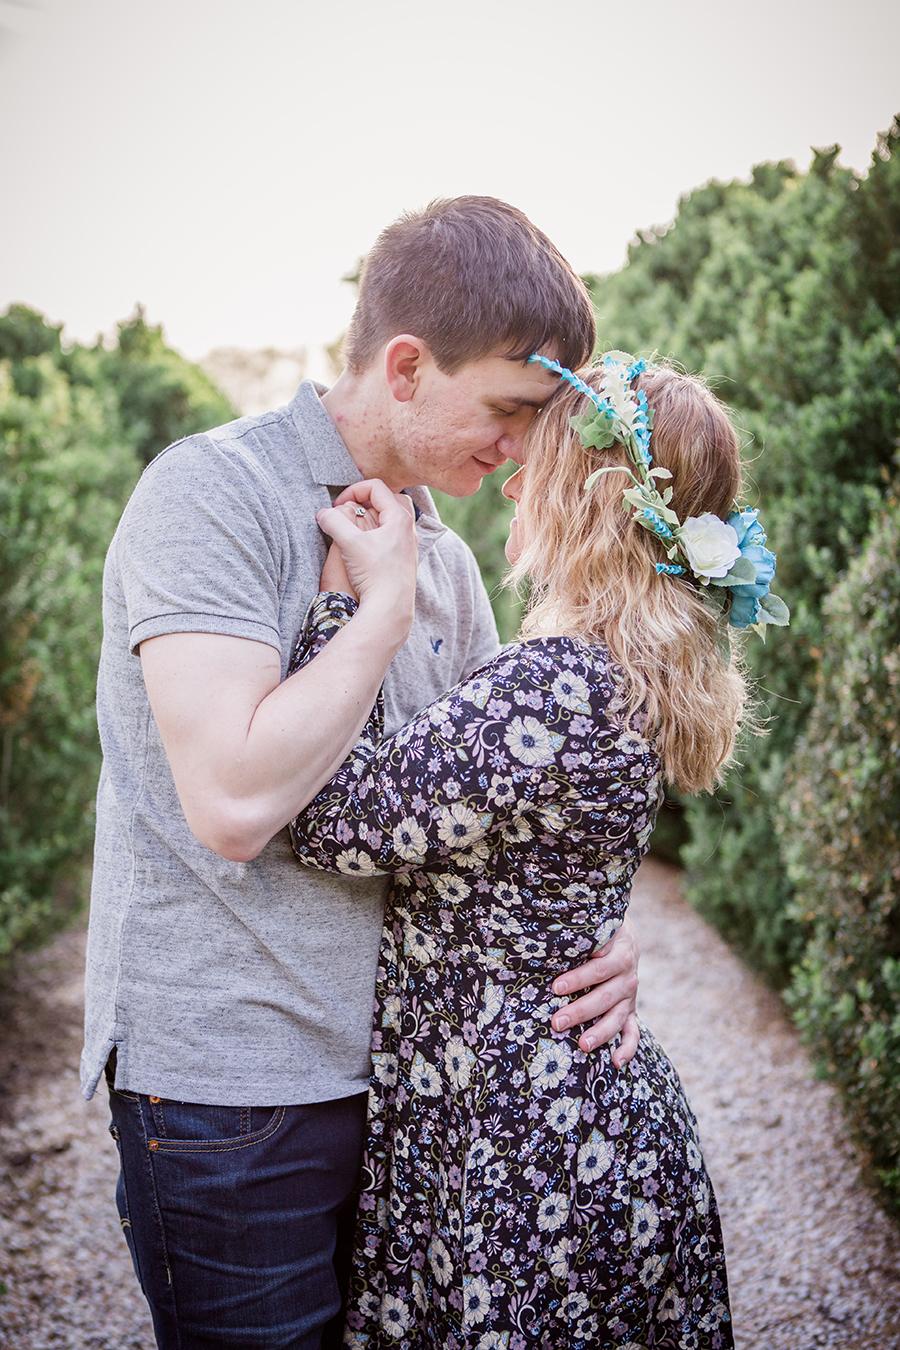 Left hand pulling her lower back close engagement photo by Knoxville Wedding Photographer, Amanda May Photos.